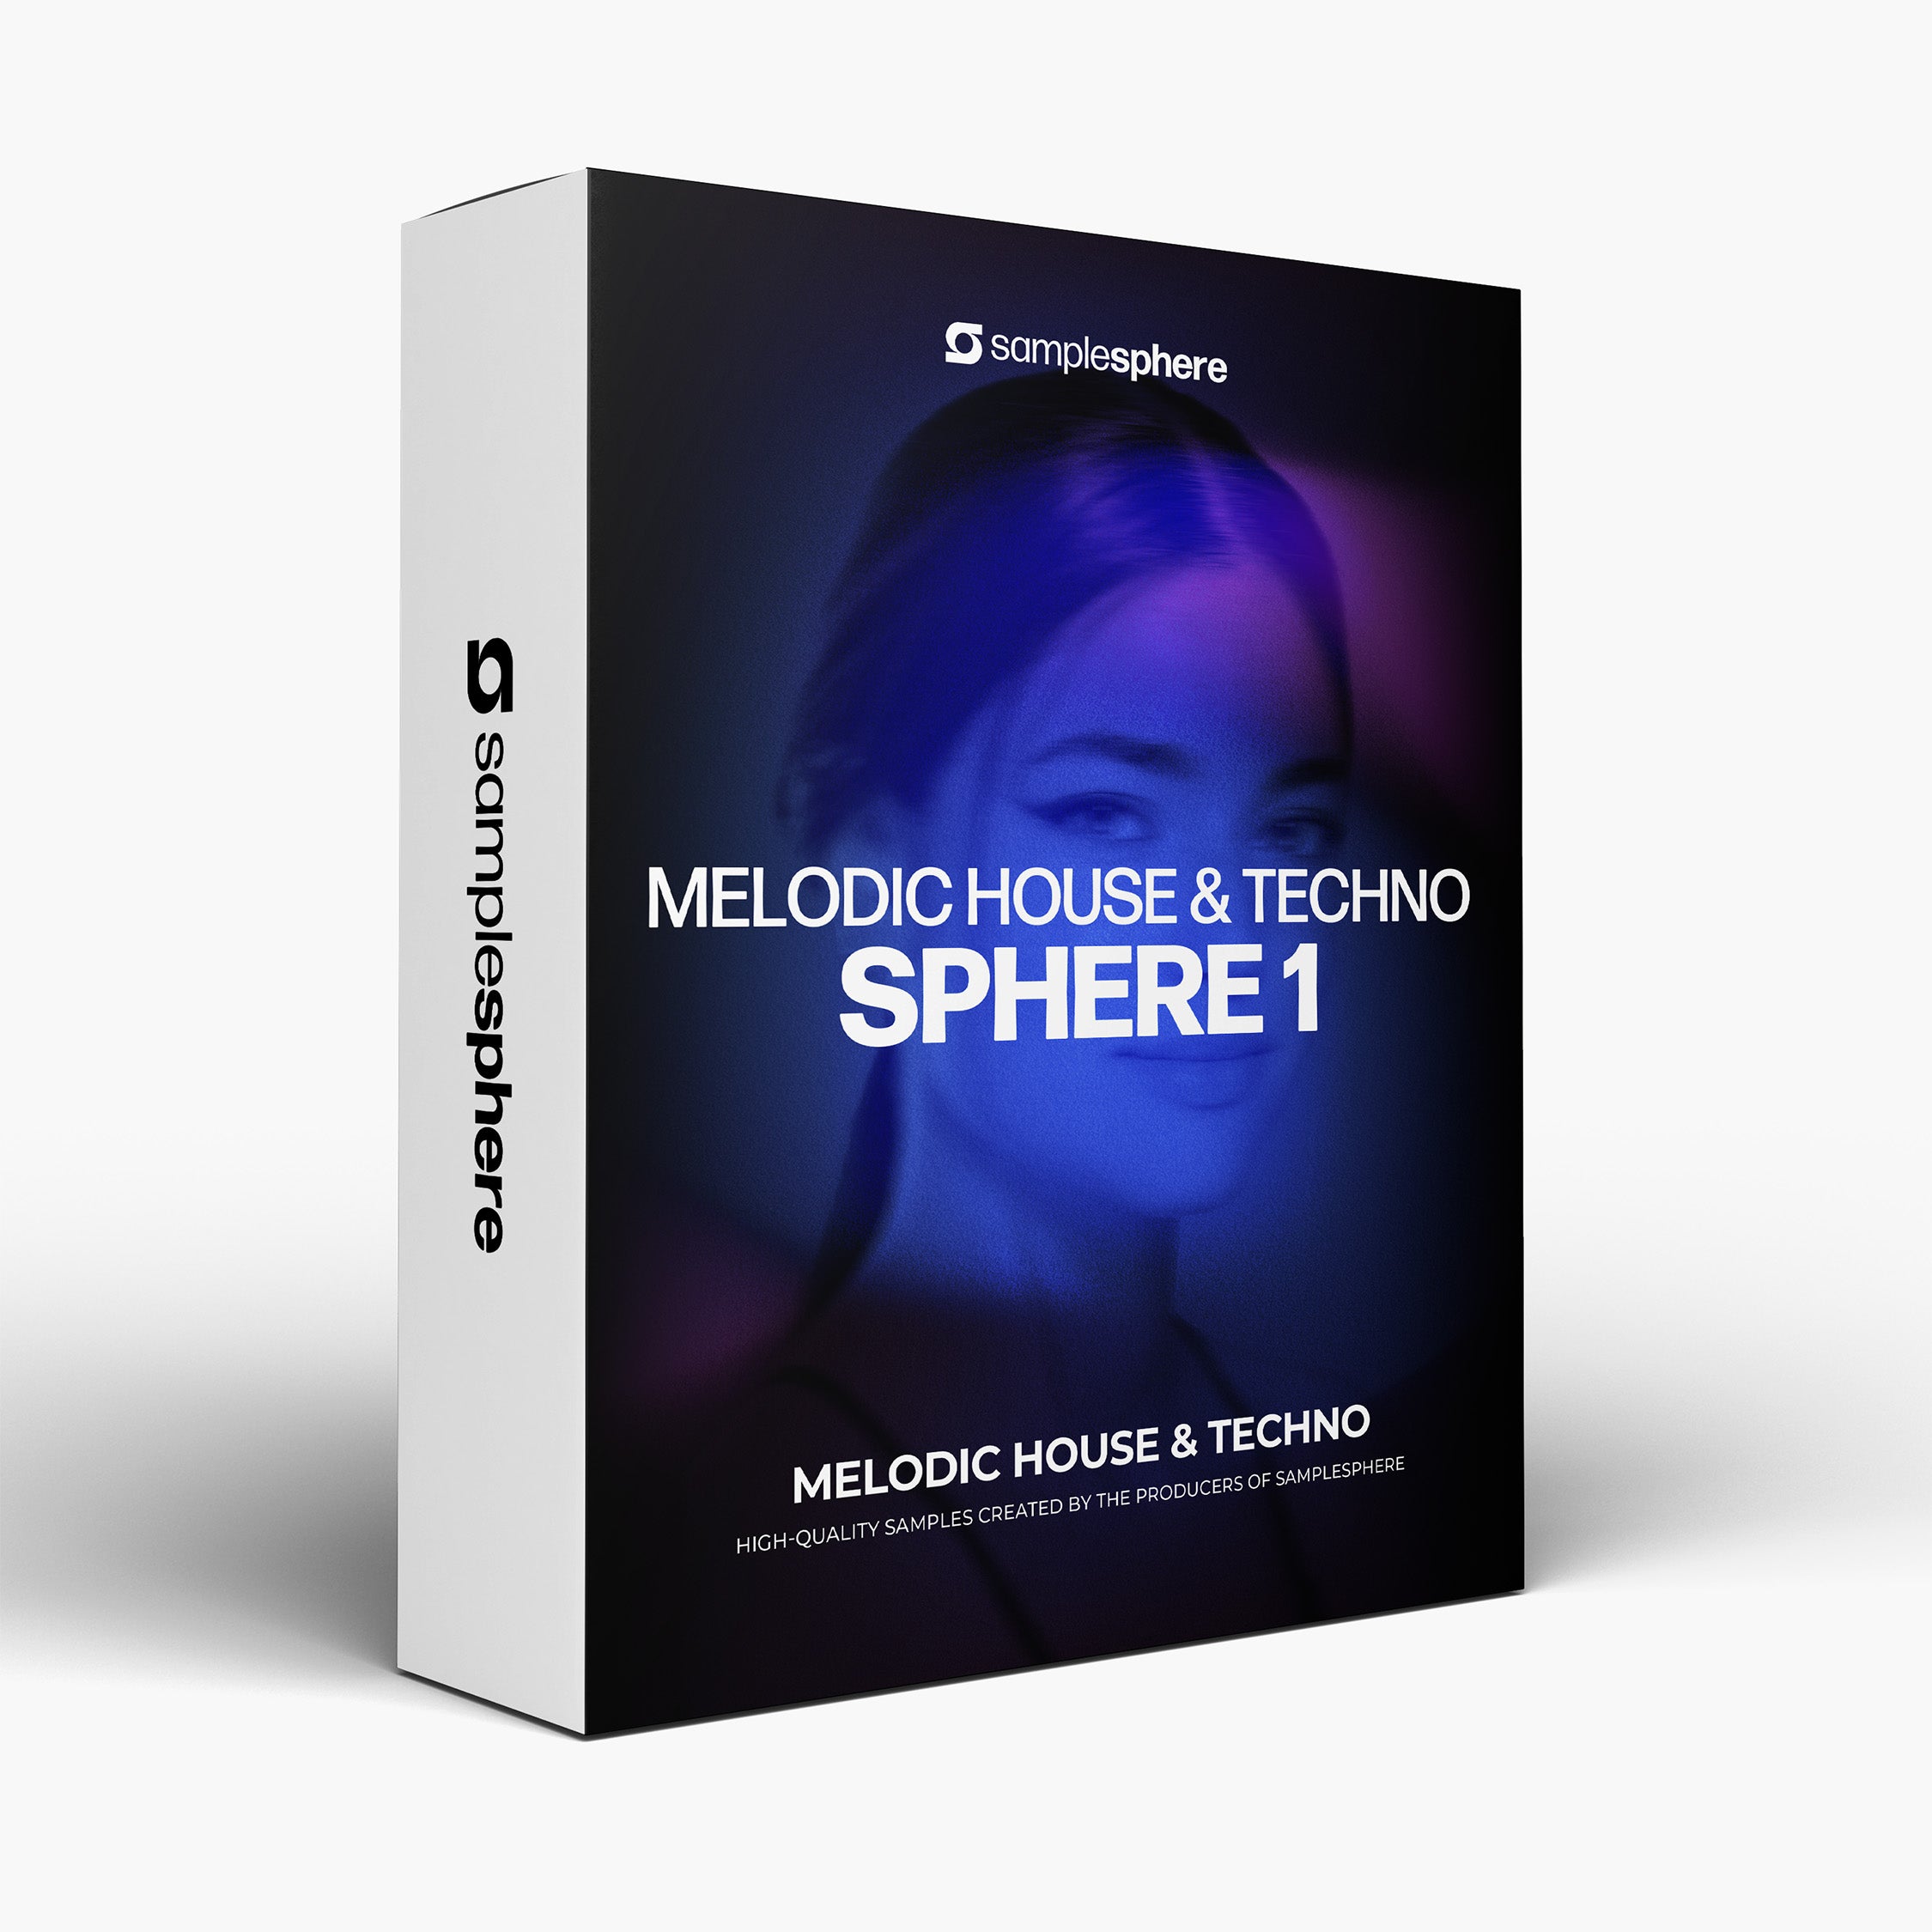 Melodic House & Techno Sphere 1